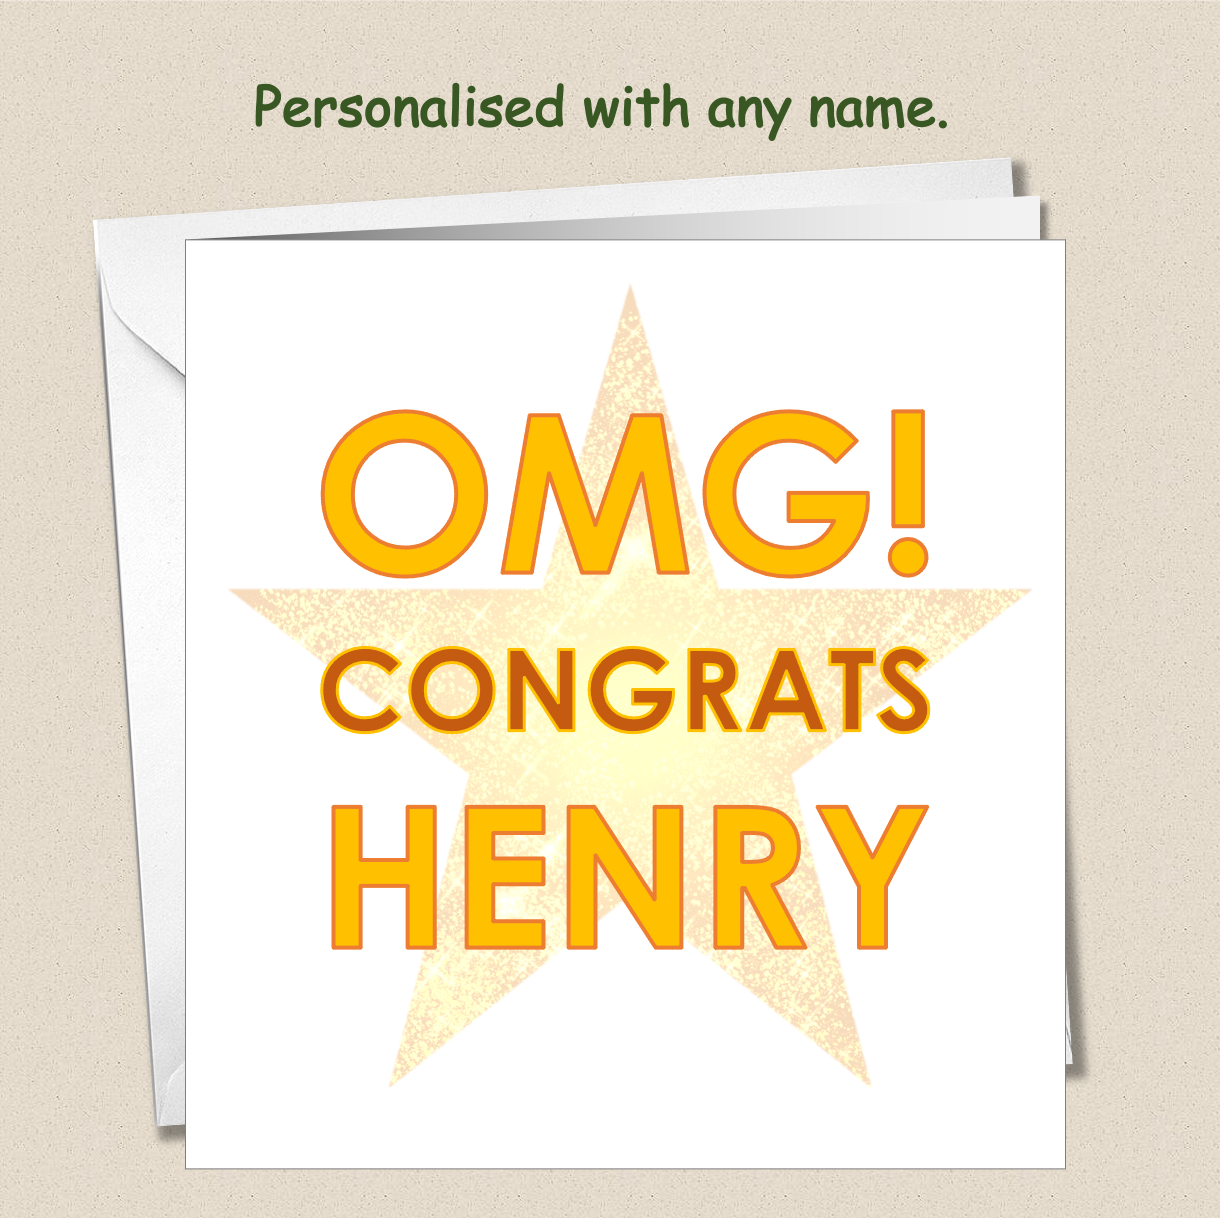 Personalised Congratulations Card - Well Done - OMG